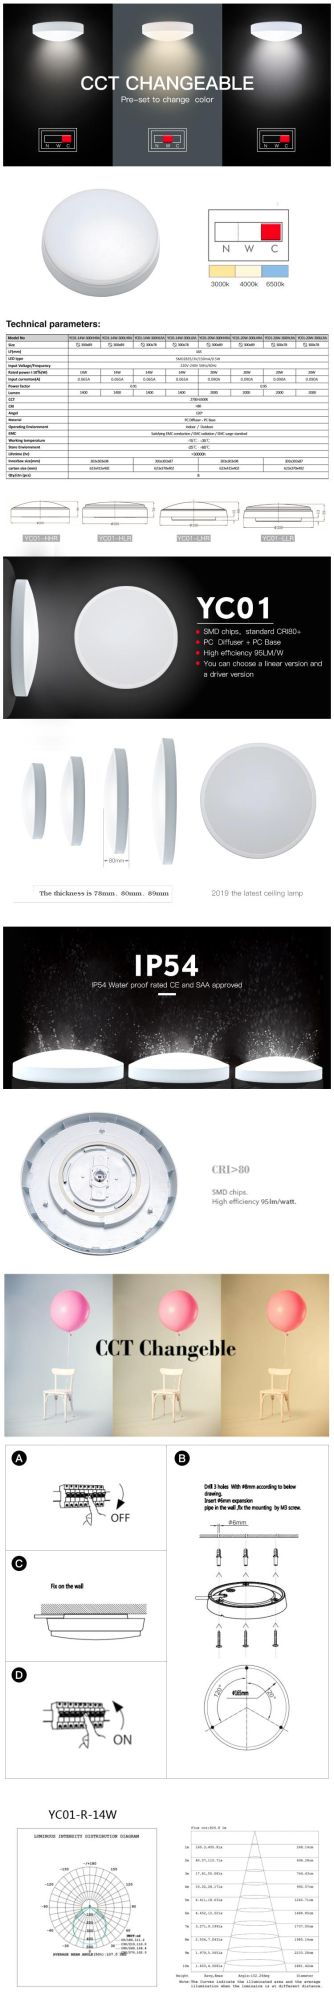 Security Light Emergency Light UL Approved Yc01 LED Ceiling Lamp